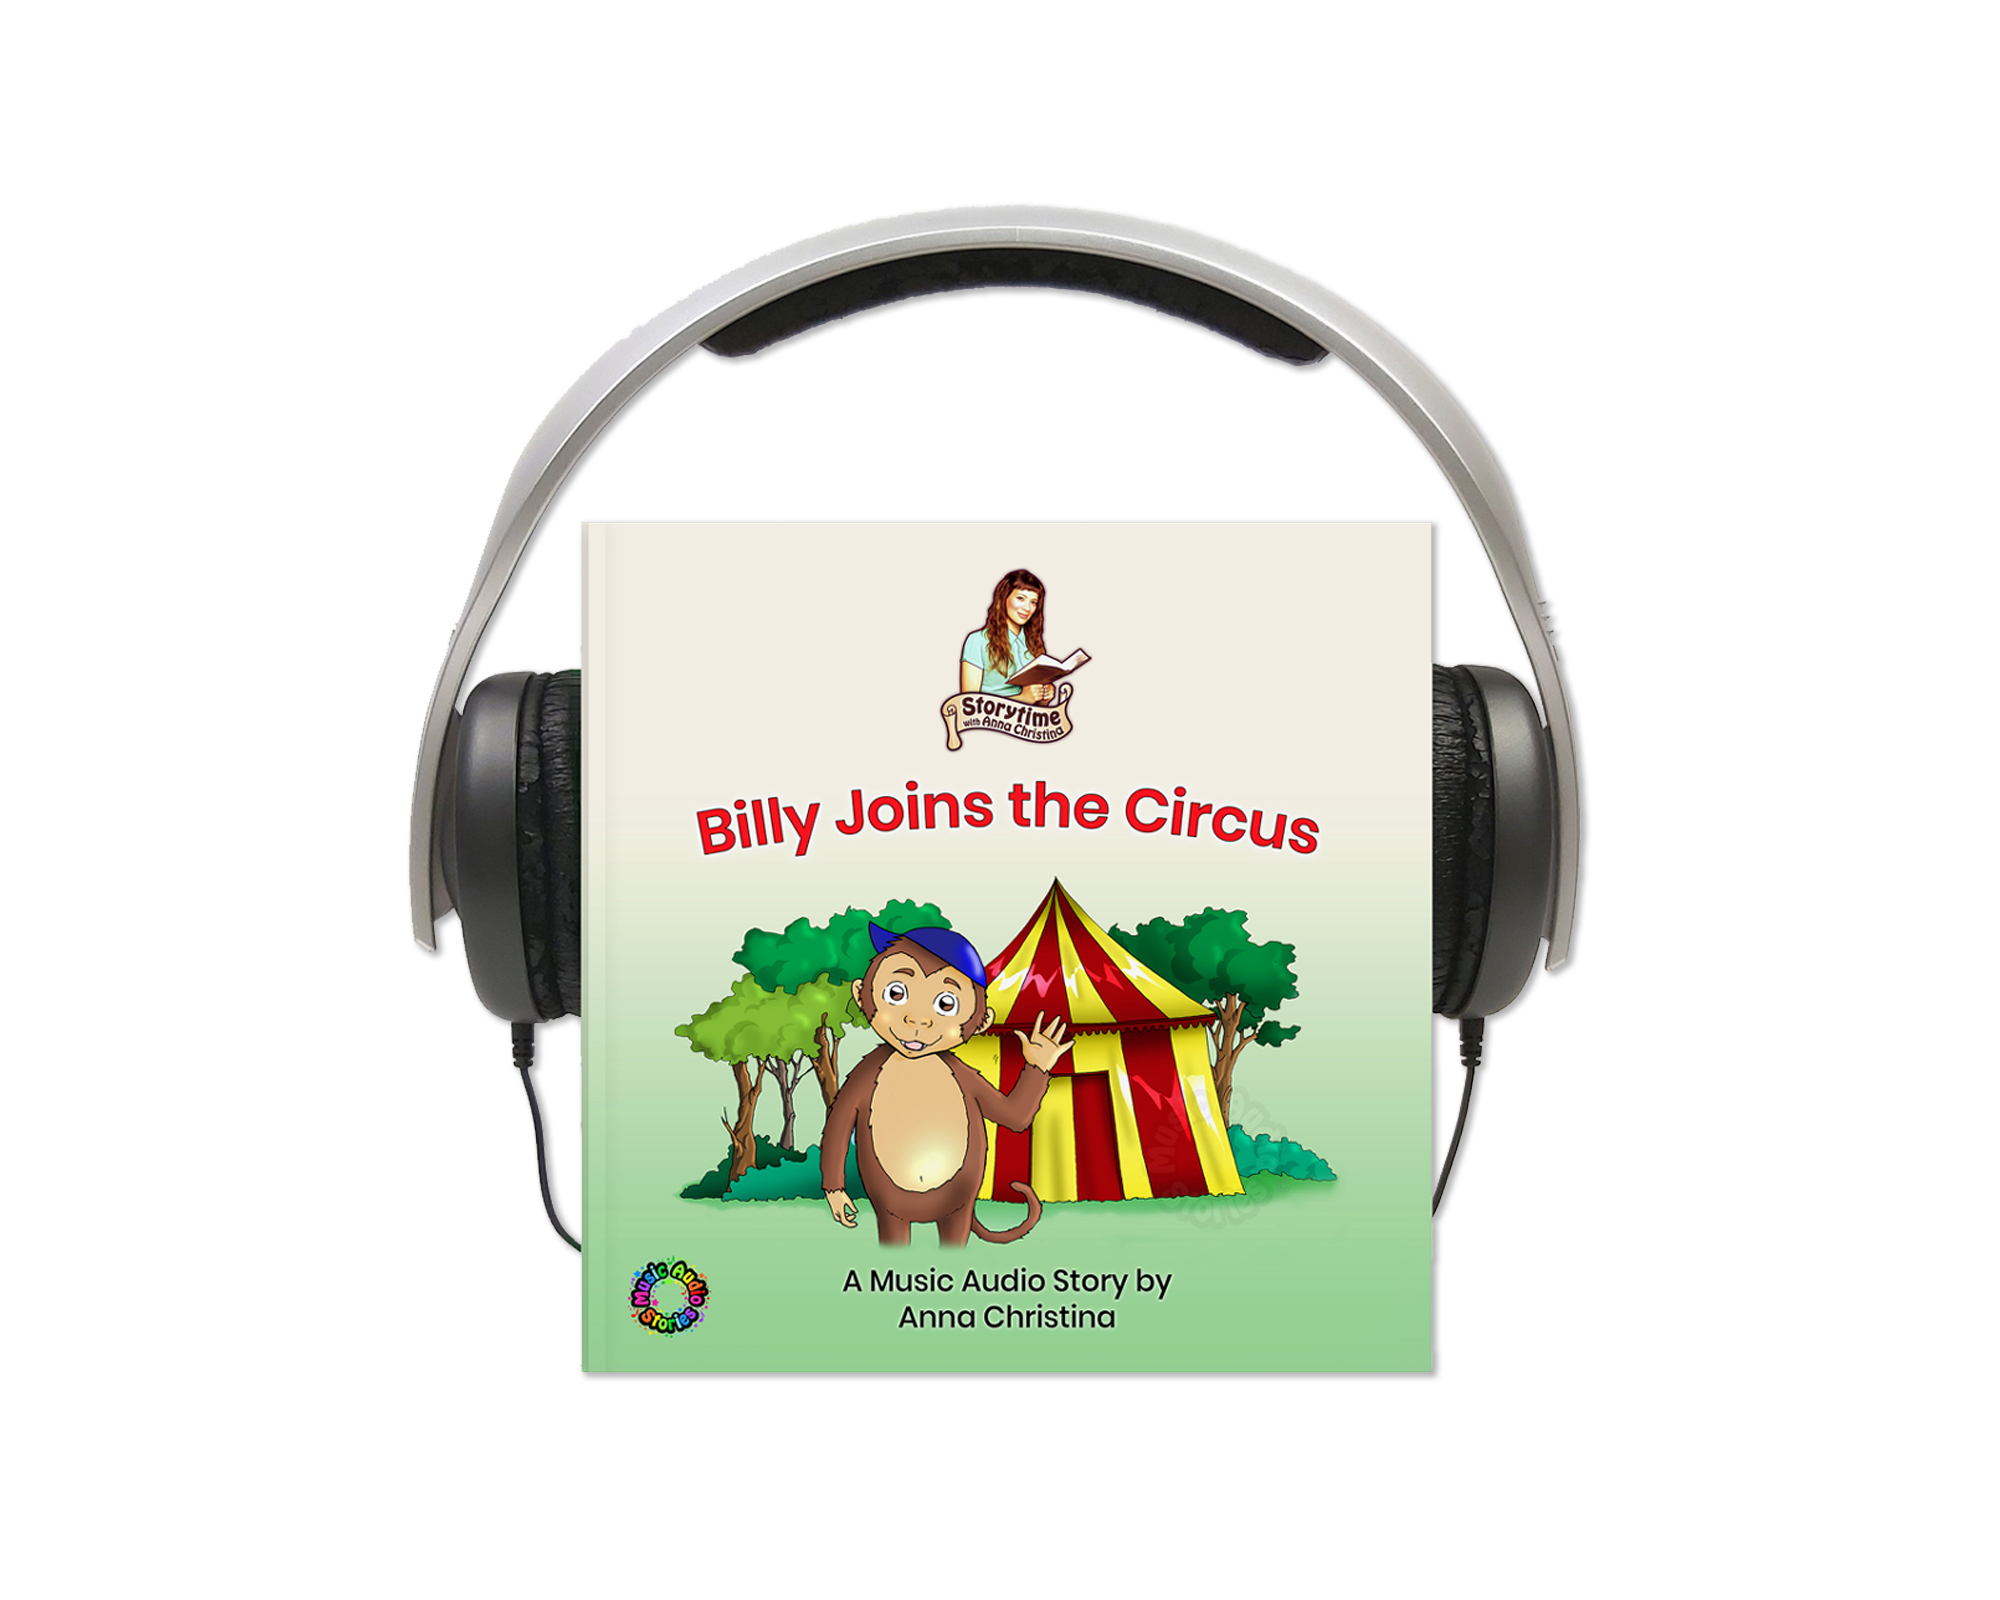 Billy Joins the Circus, music audiobook image